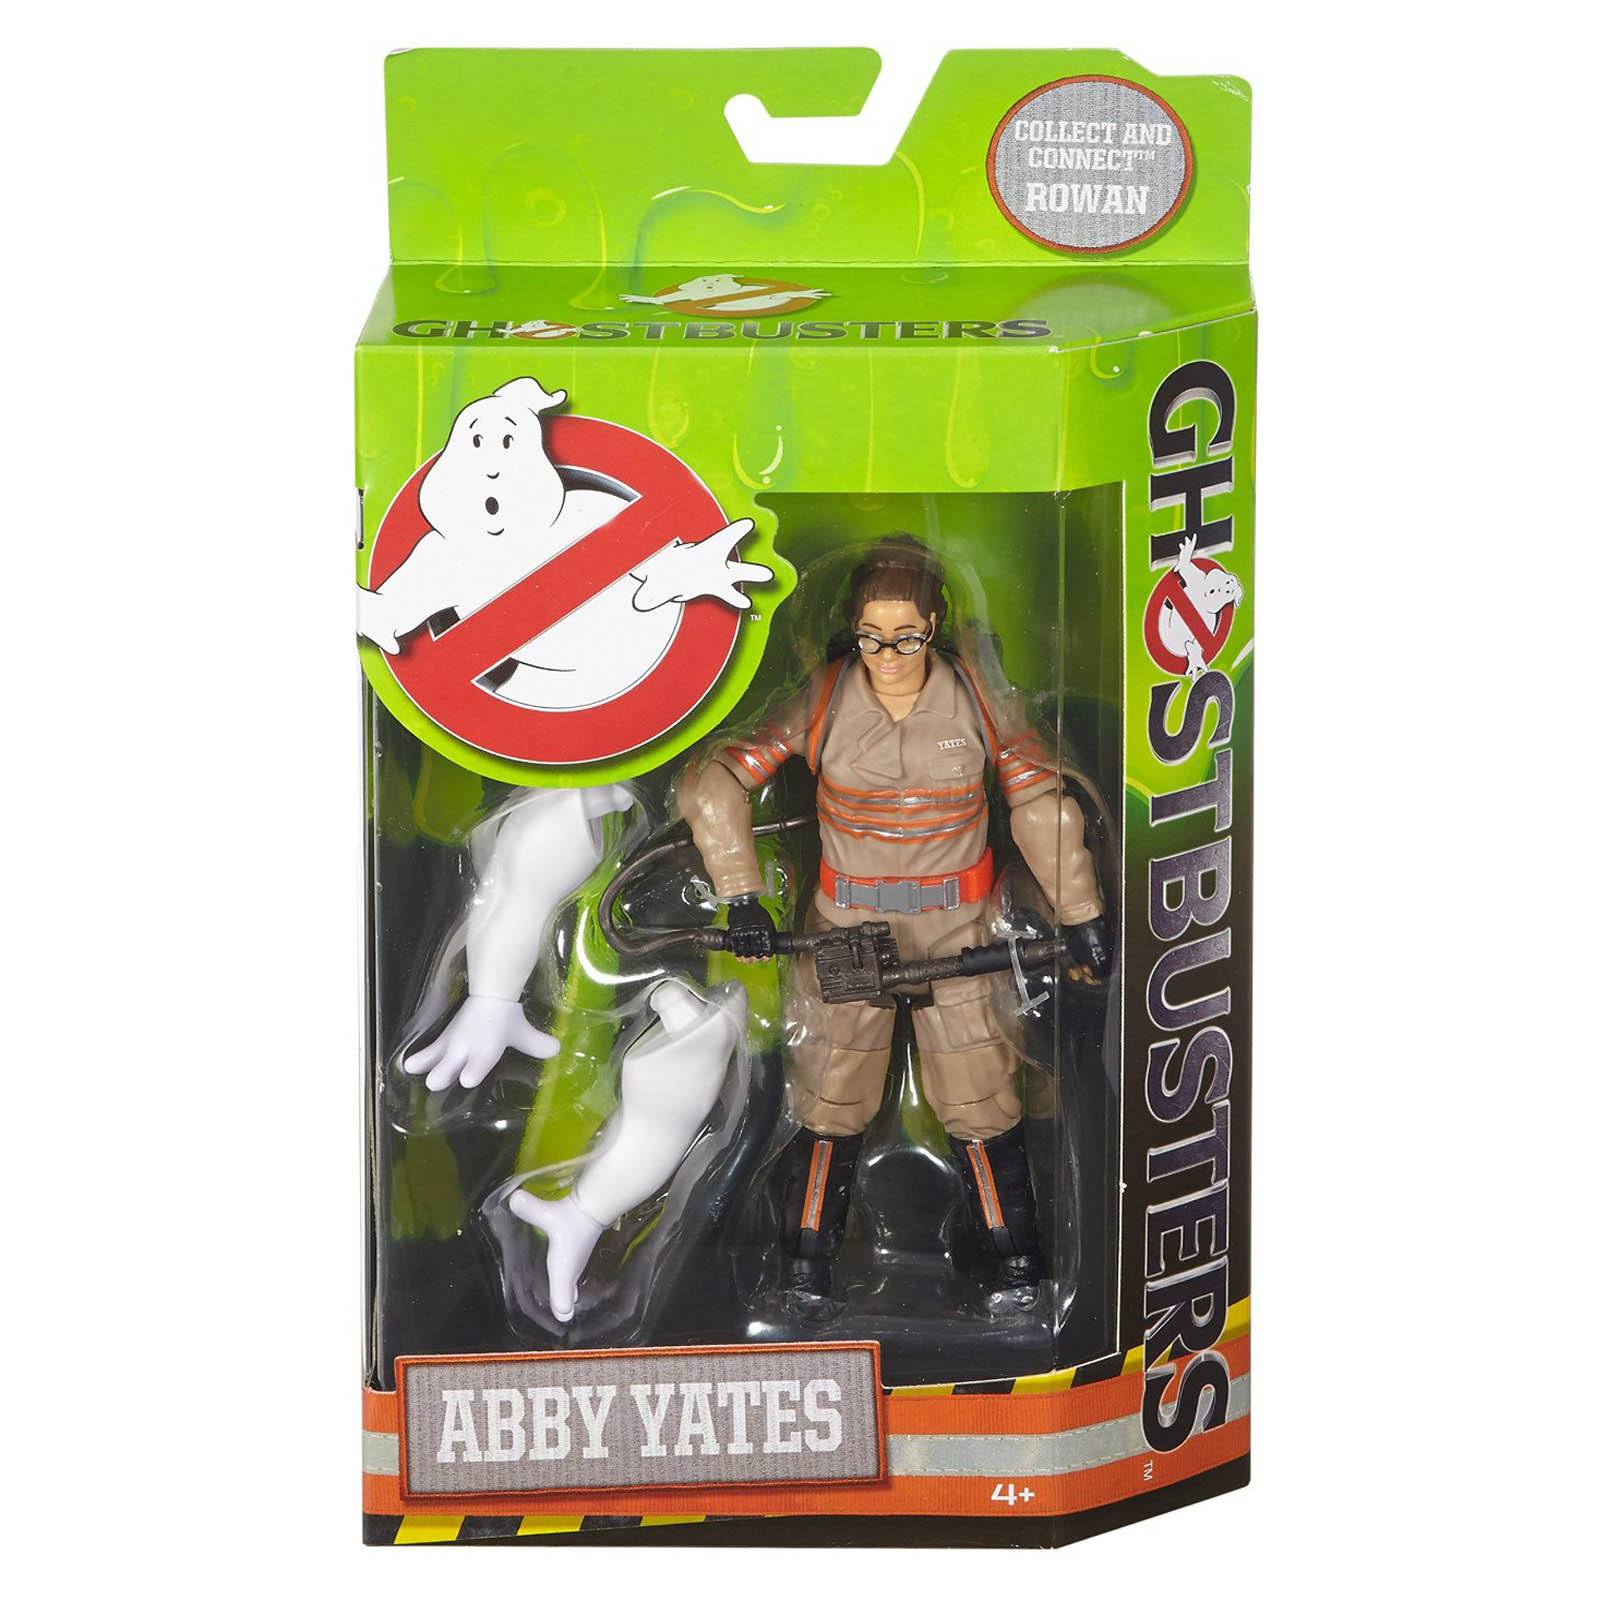 ghostbusters 6 inch figures